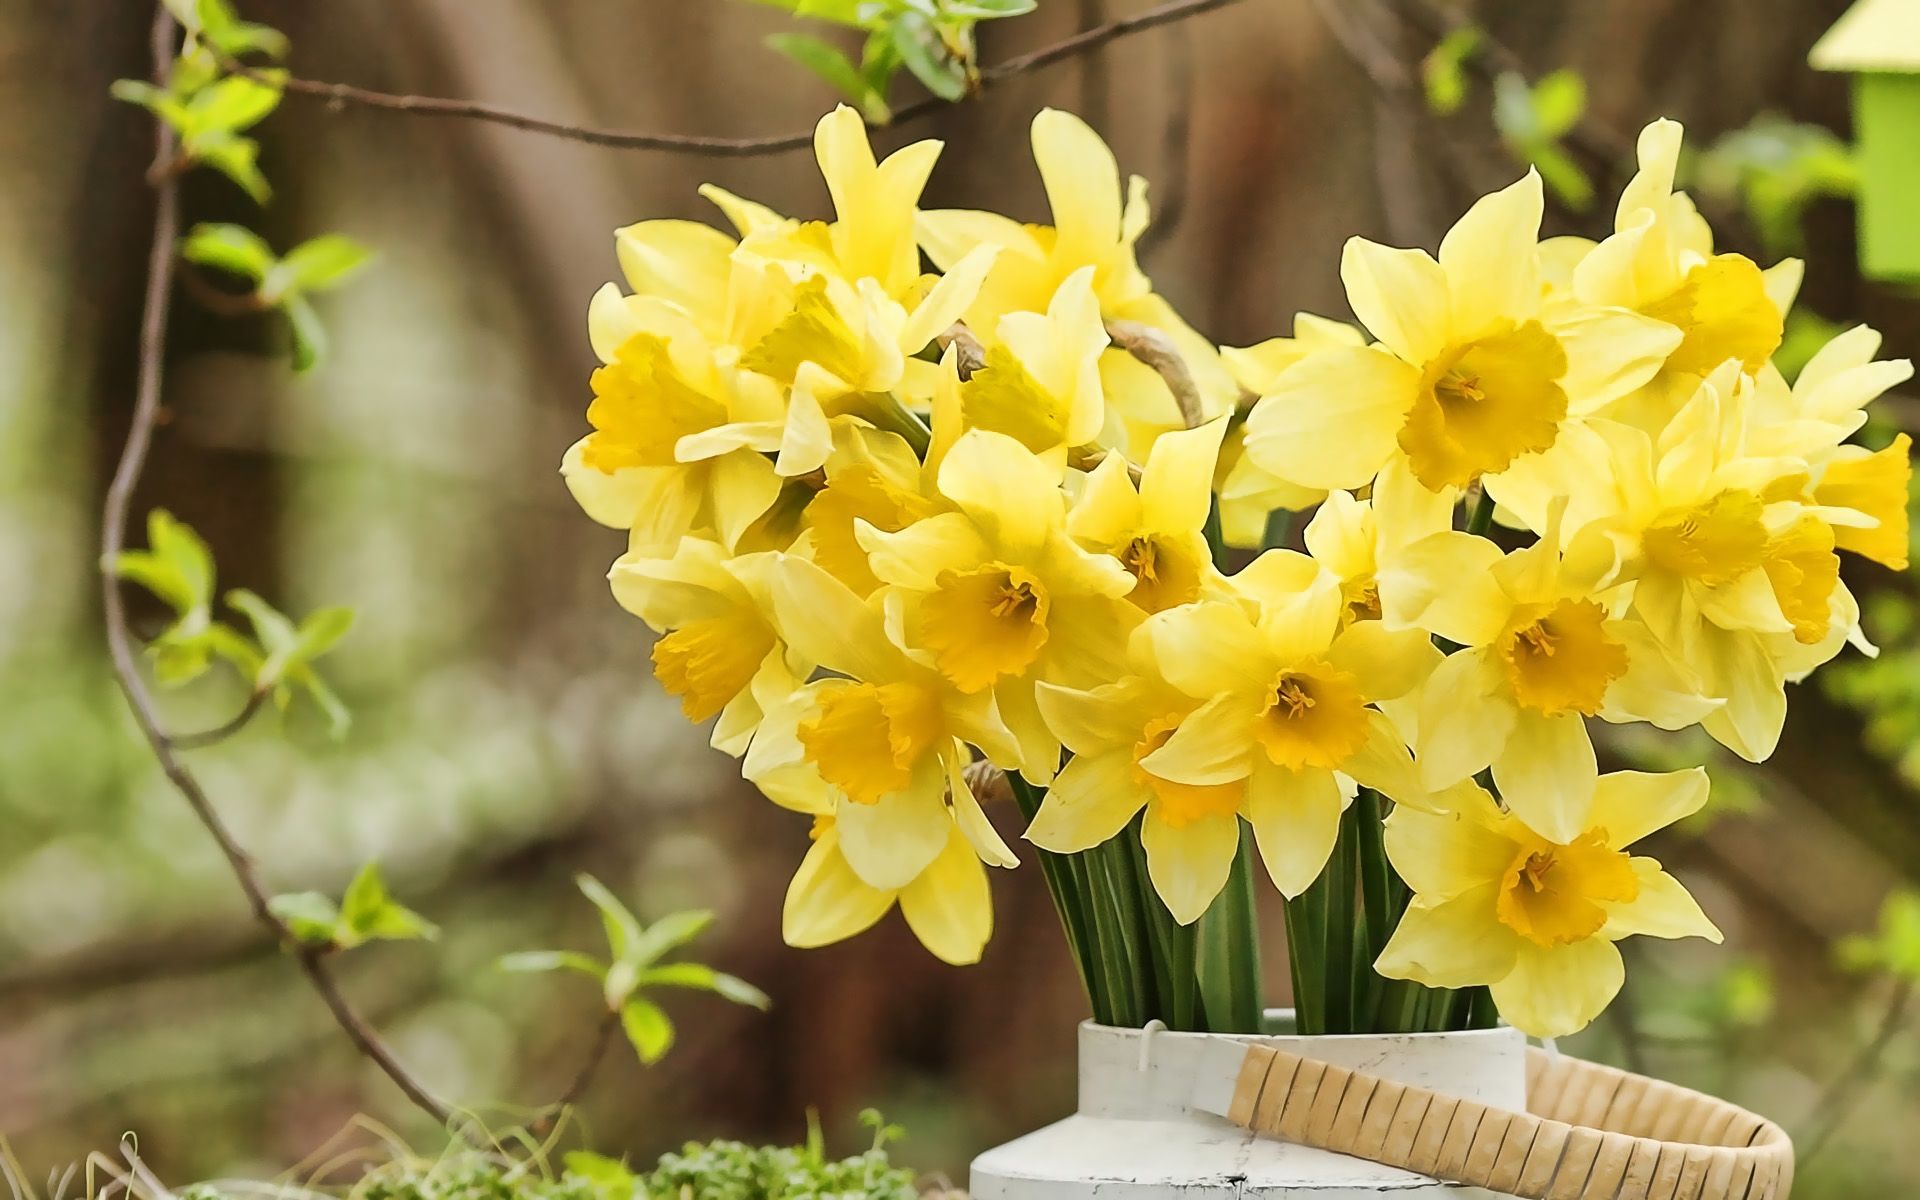 Download wallpaper yellow daffodils, spring flowers, bouquet of daffodils, yellow flowers, daffodilly, Narcissus for desktop with resolution 1920x1200. High Quality HD picture wallpaper